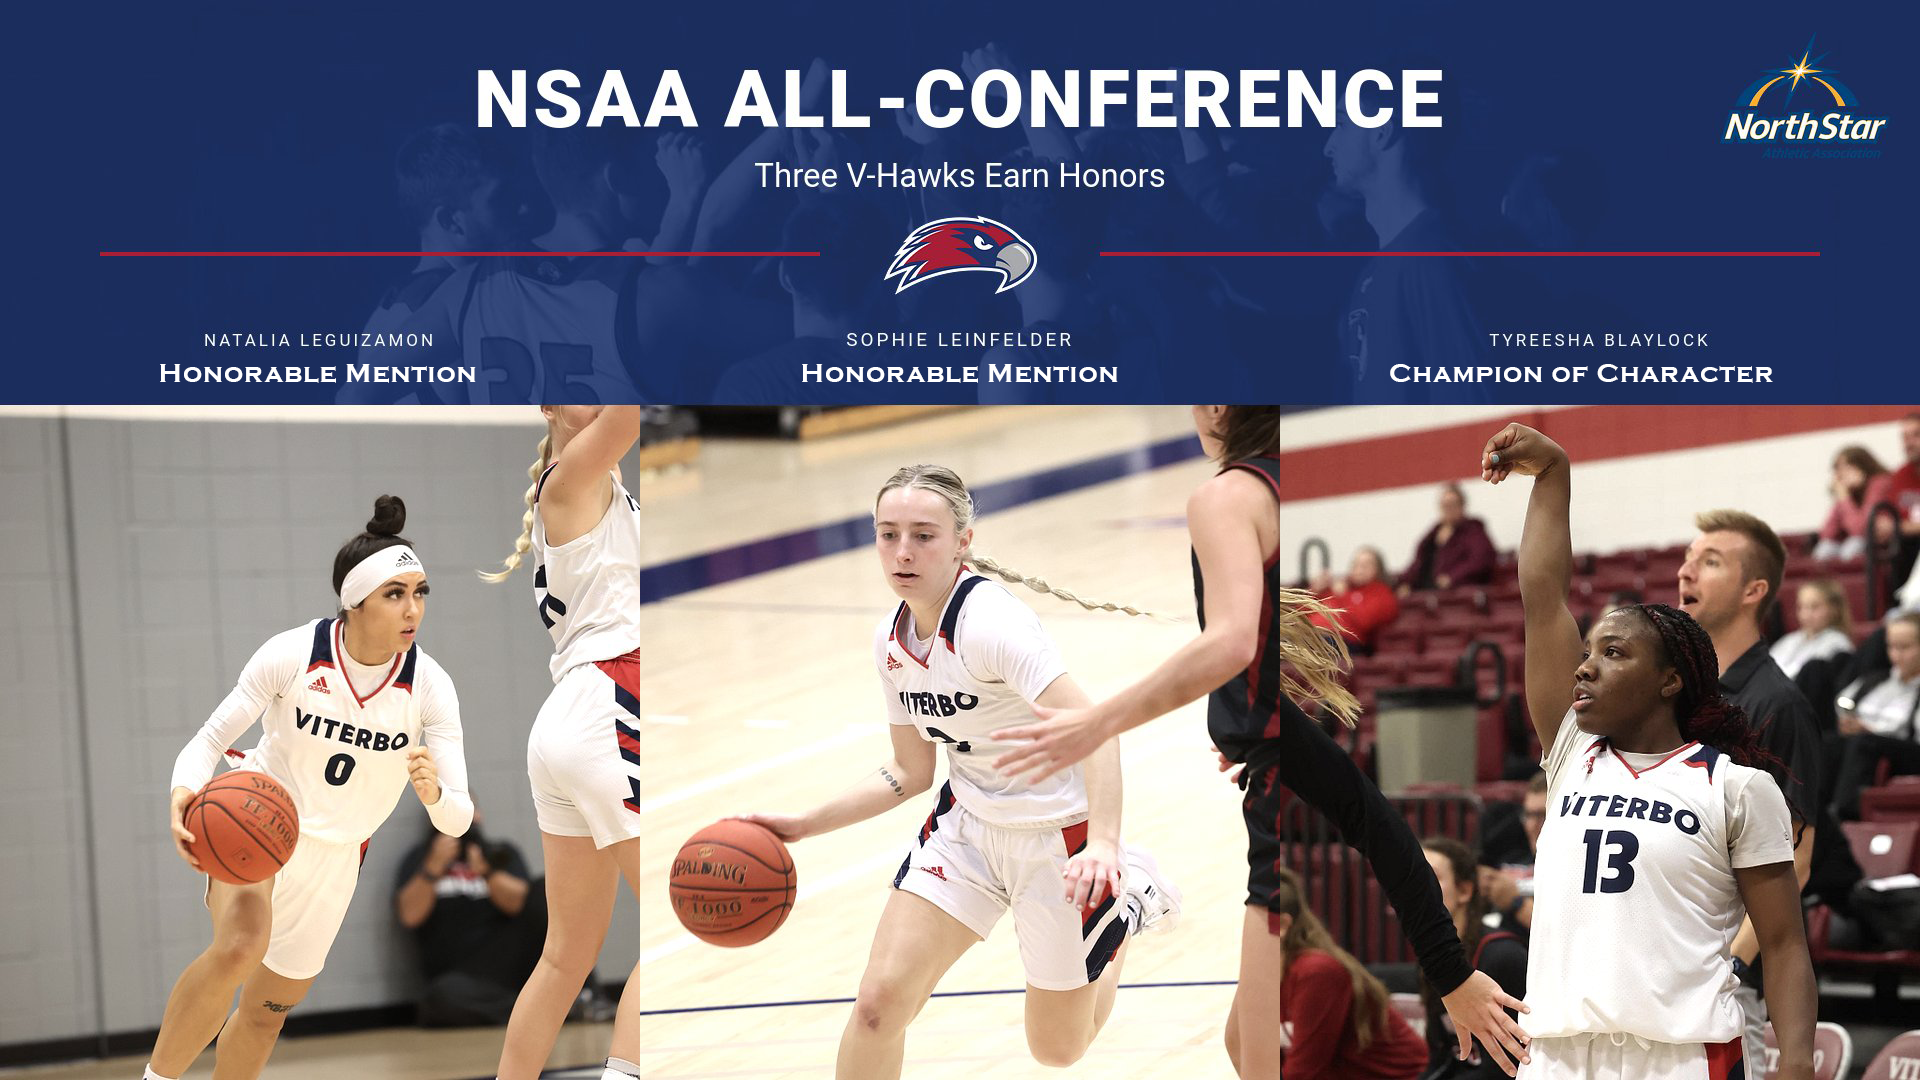 Two V-Hawks Named Honorable Mentions